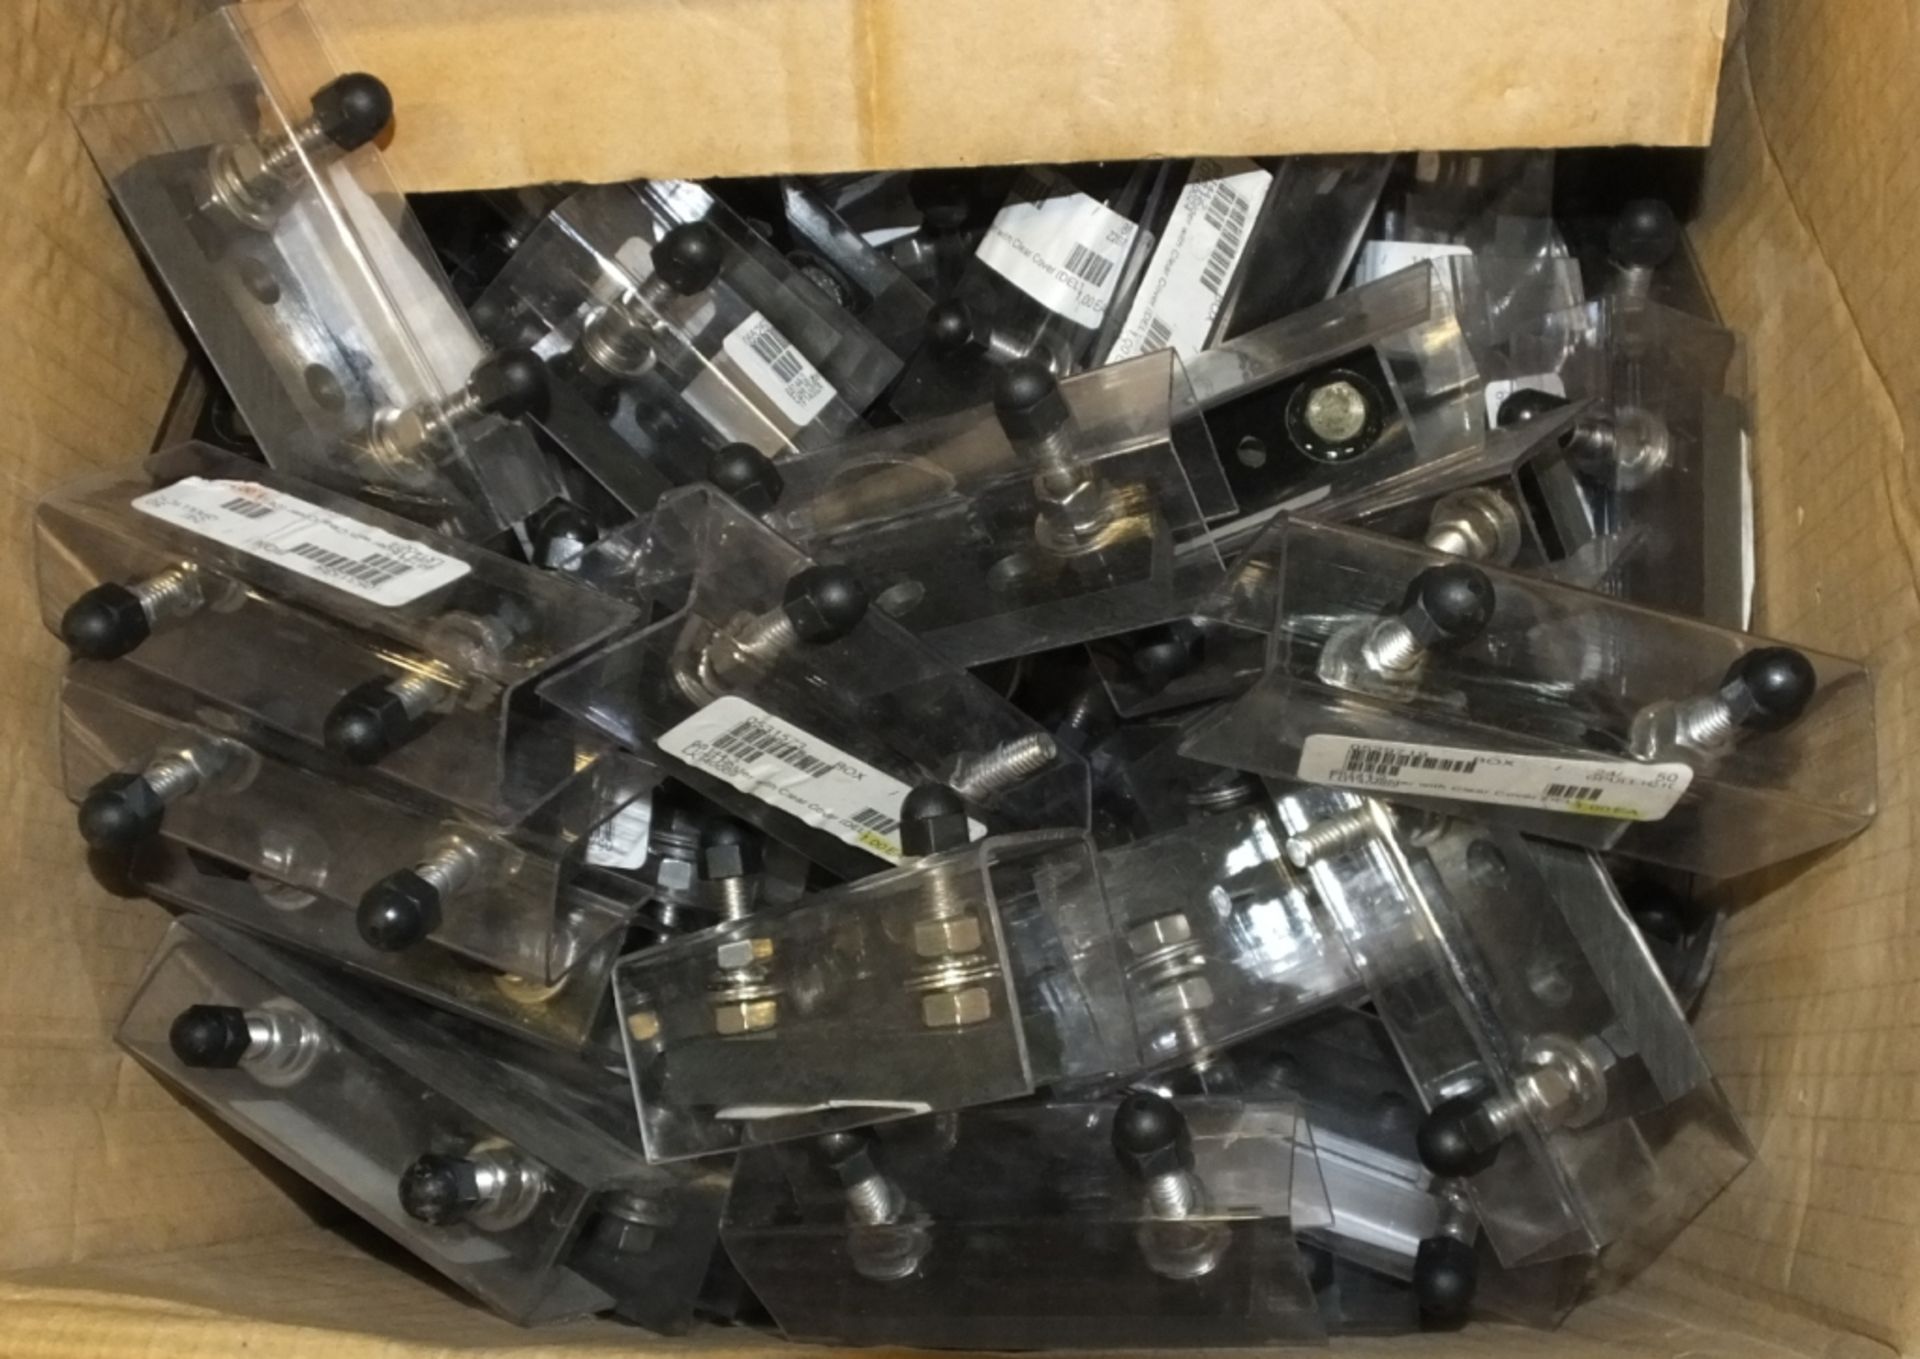 2x Boxes of Heavy Duty Fuse Holders - approx 100